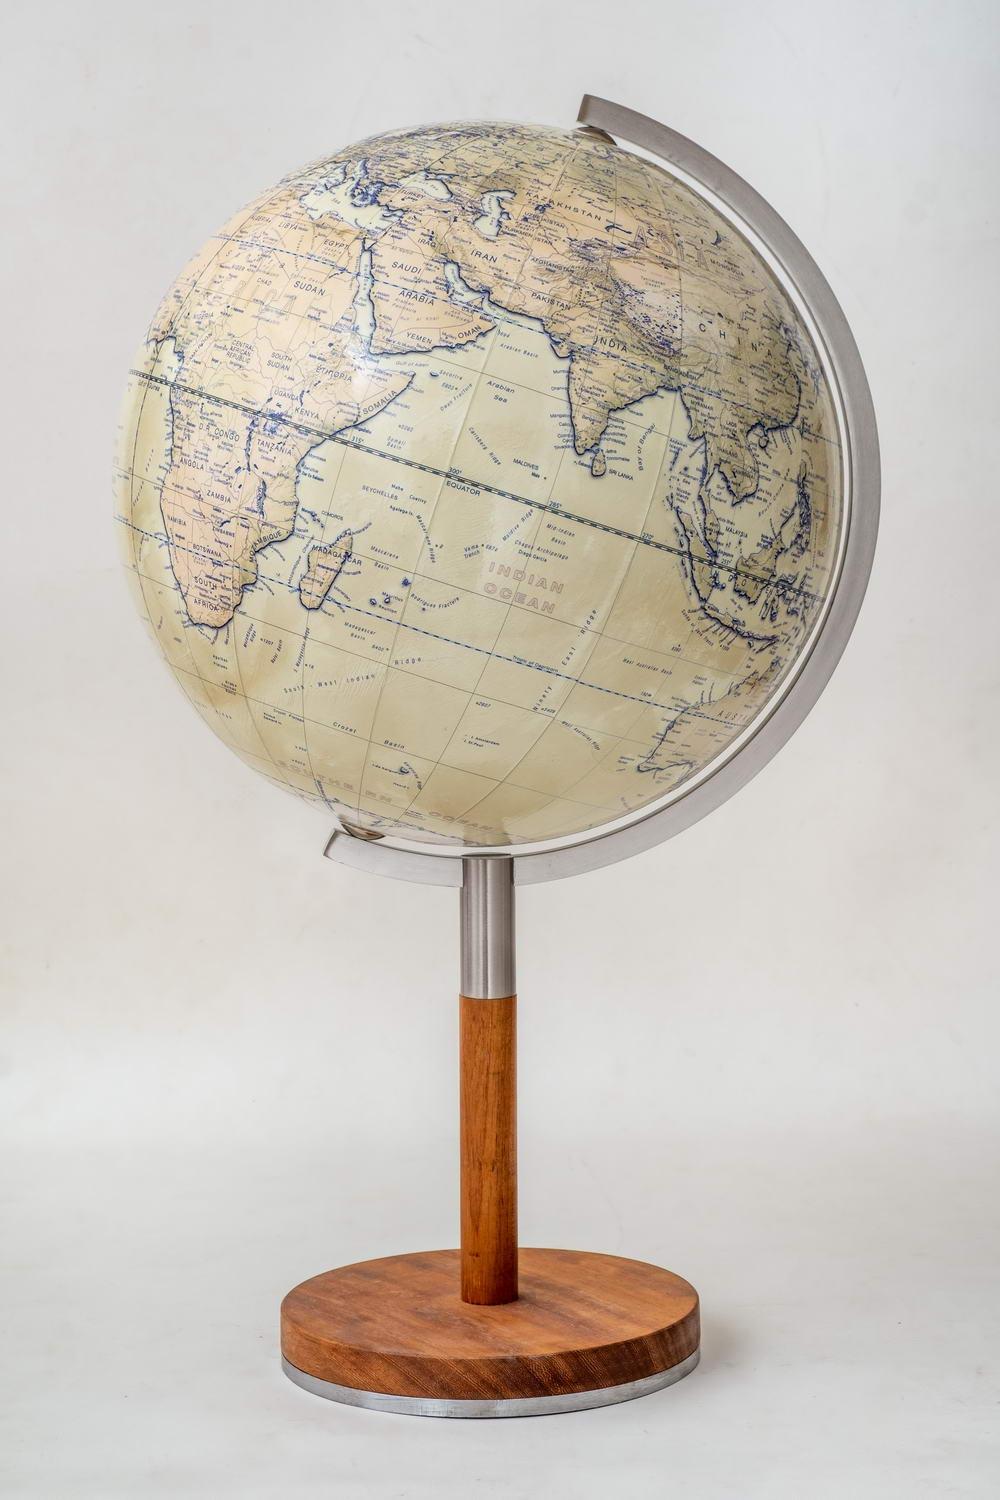 This stylish, classically contemporary table globe reflects the world as it is today, with up to date cartography.  The map palette is muted and easy on the eye, making it a timeless addition to any study or living space.
The stand is elegantly